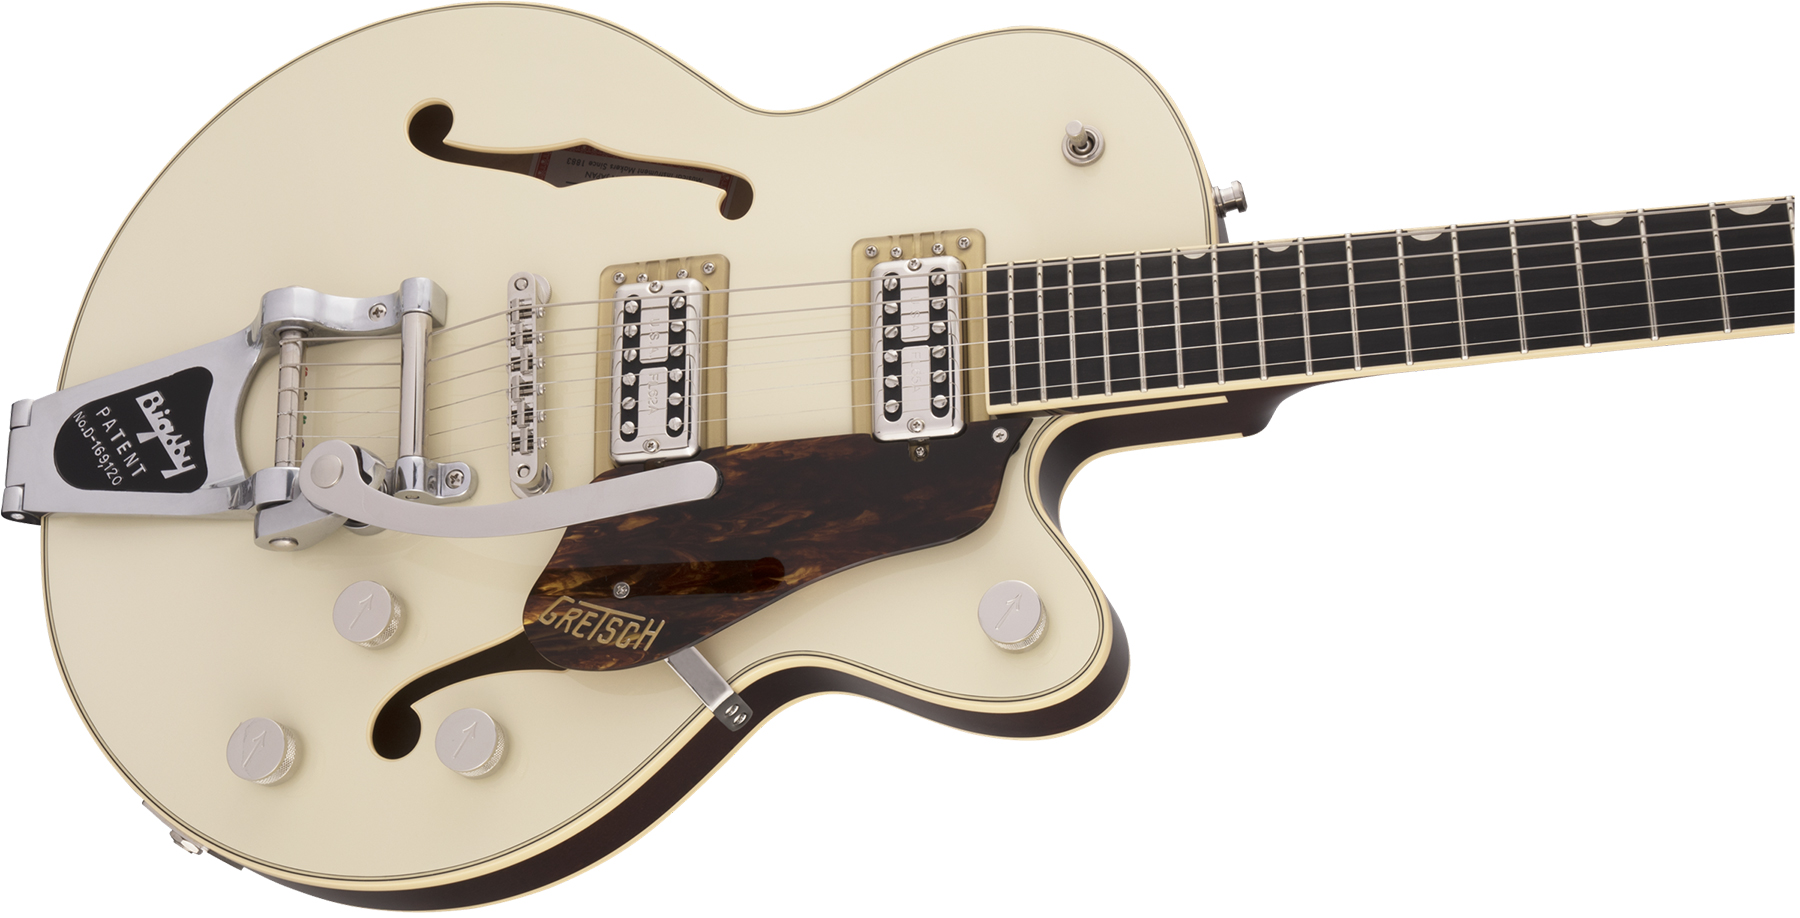 Gretsch G6659t Broadkaster Jr Center Bloc Players Edition Nashville Pro Japon Bigsby Eb - Two-tone Lotus Ivory/walnut Stain - Guitarra eléctrica semi 